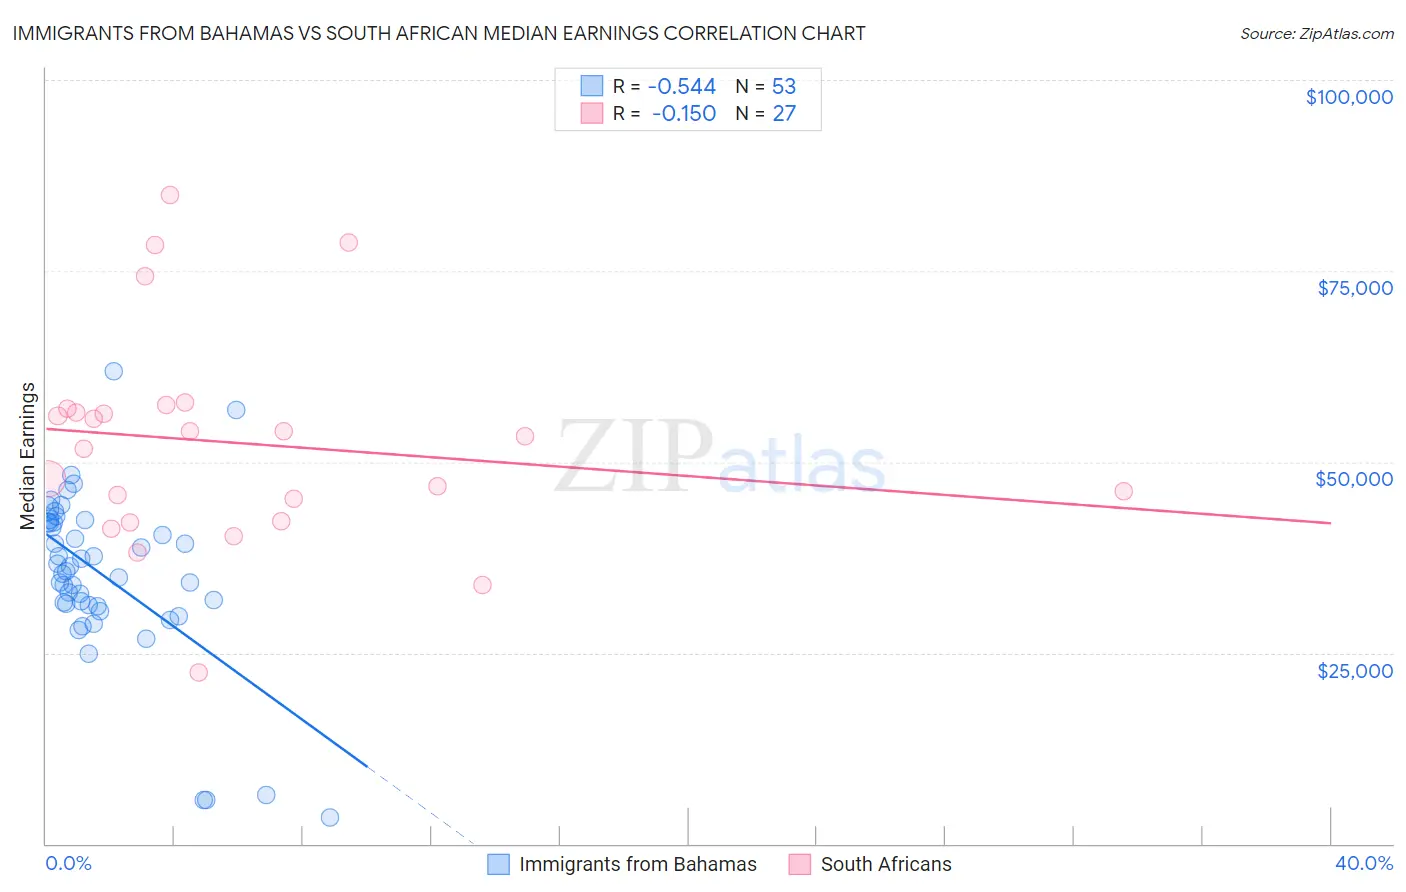 Immigrants from Bahamas vs South African Median Earnings